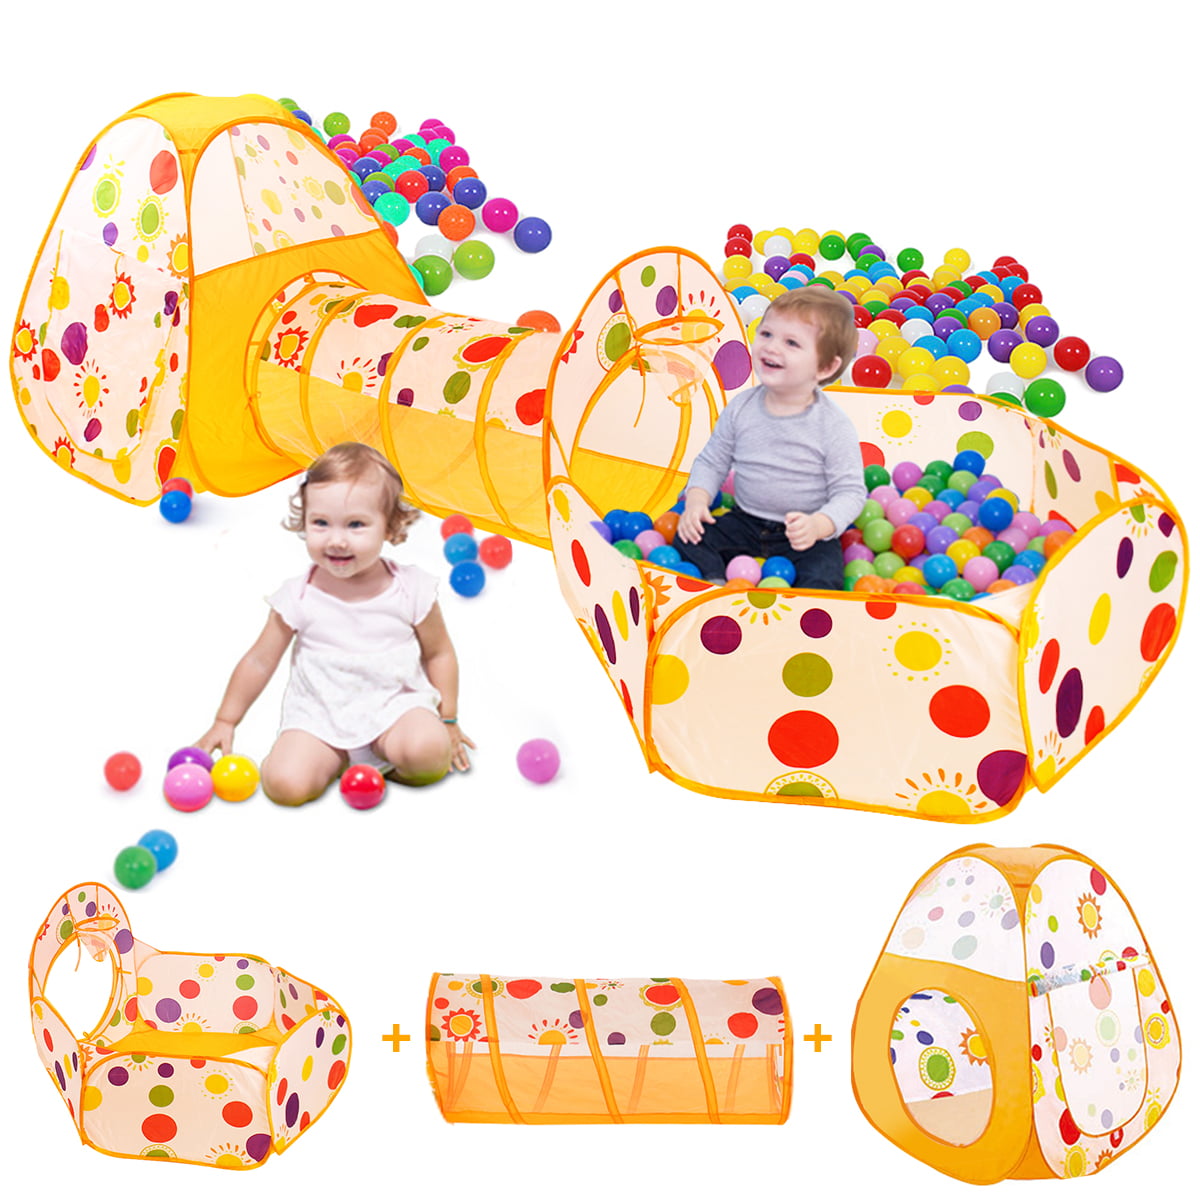 Toddler Playhouse for Indoor & Outdoor SparkleDay 3 pc Kids Princess Castle Play Tent Crawl Tunnel & Ball Pit with Basketball Hoop Toys for Girls and Boys 